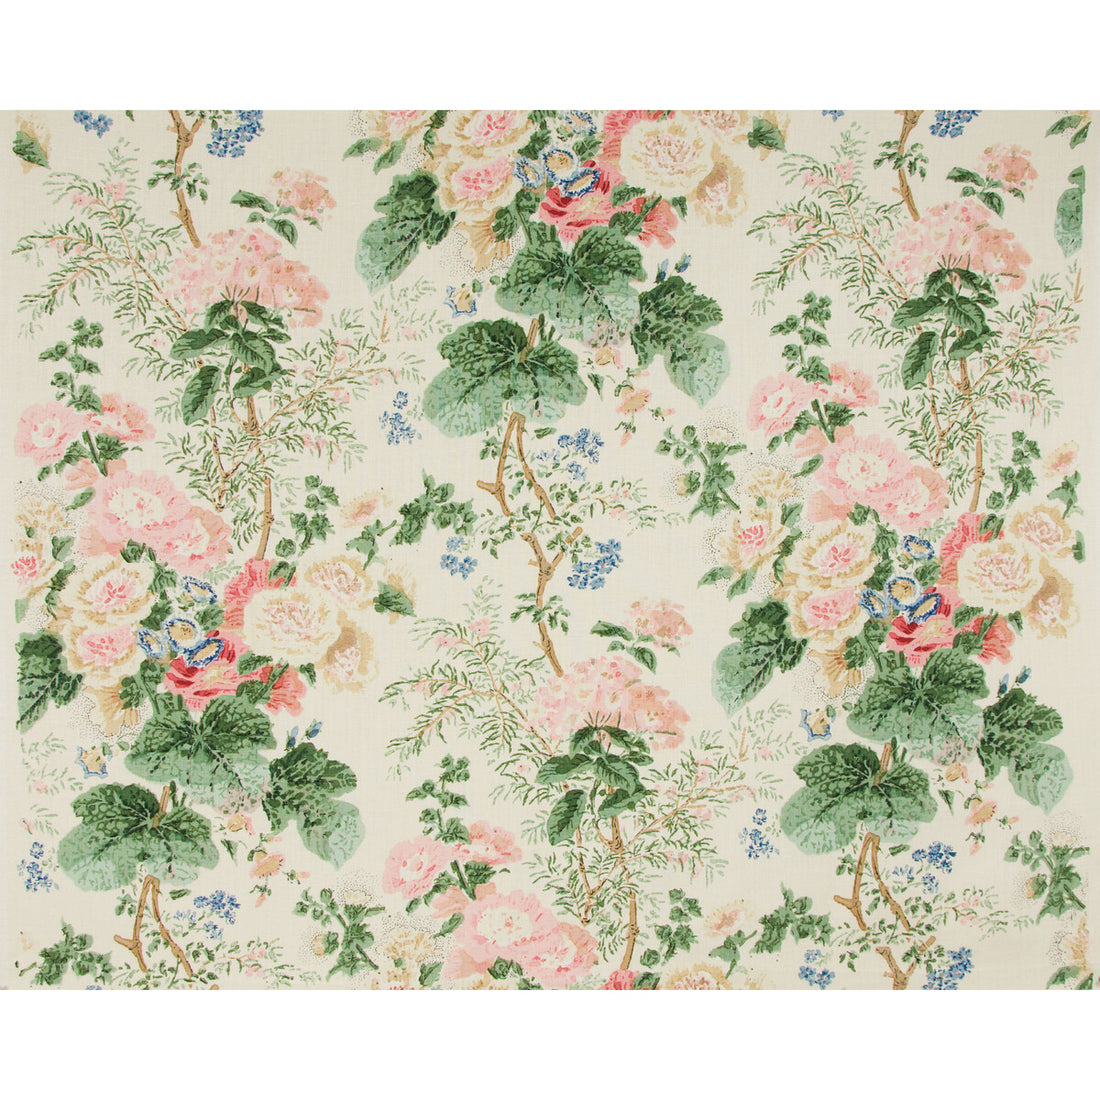 Hollyhock Hdb fabric in white/coral color - pattern HOLLYHOCK HAND.WHT-COR.0 - by Lee Jofa